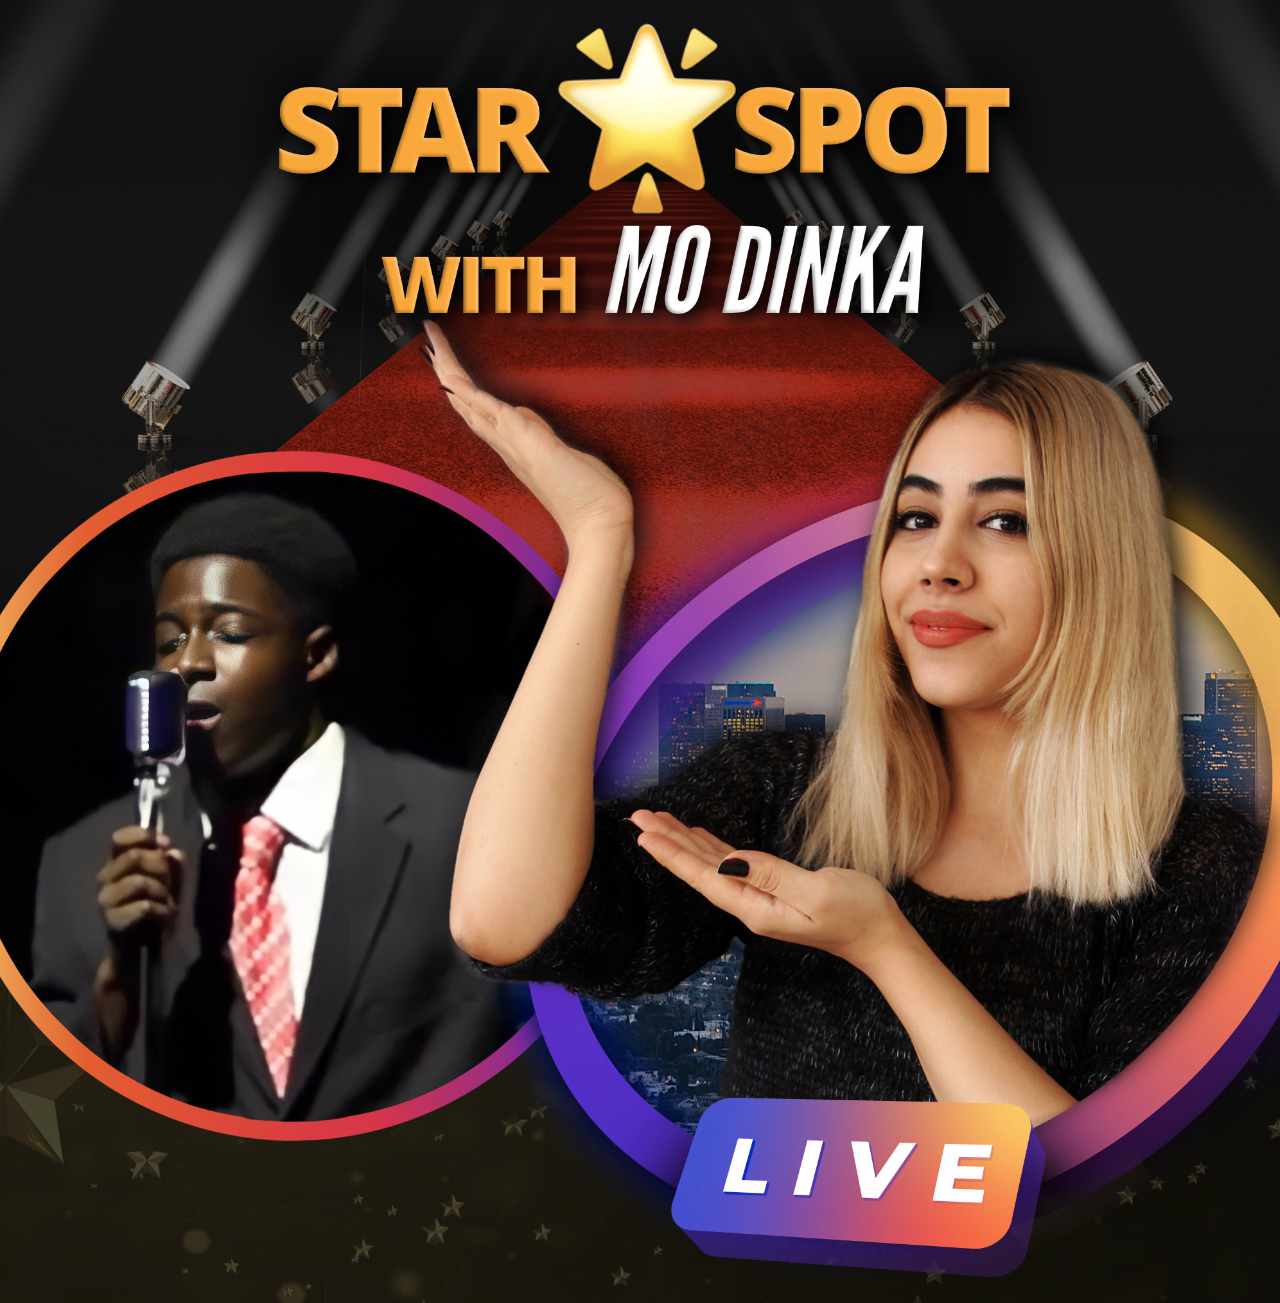 Promotional cover art of Star Spot with Mo Dinka